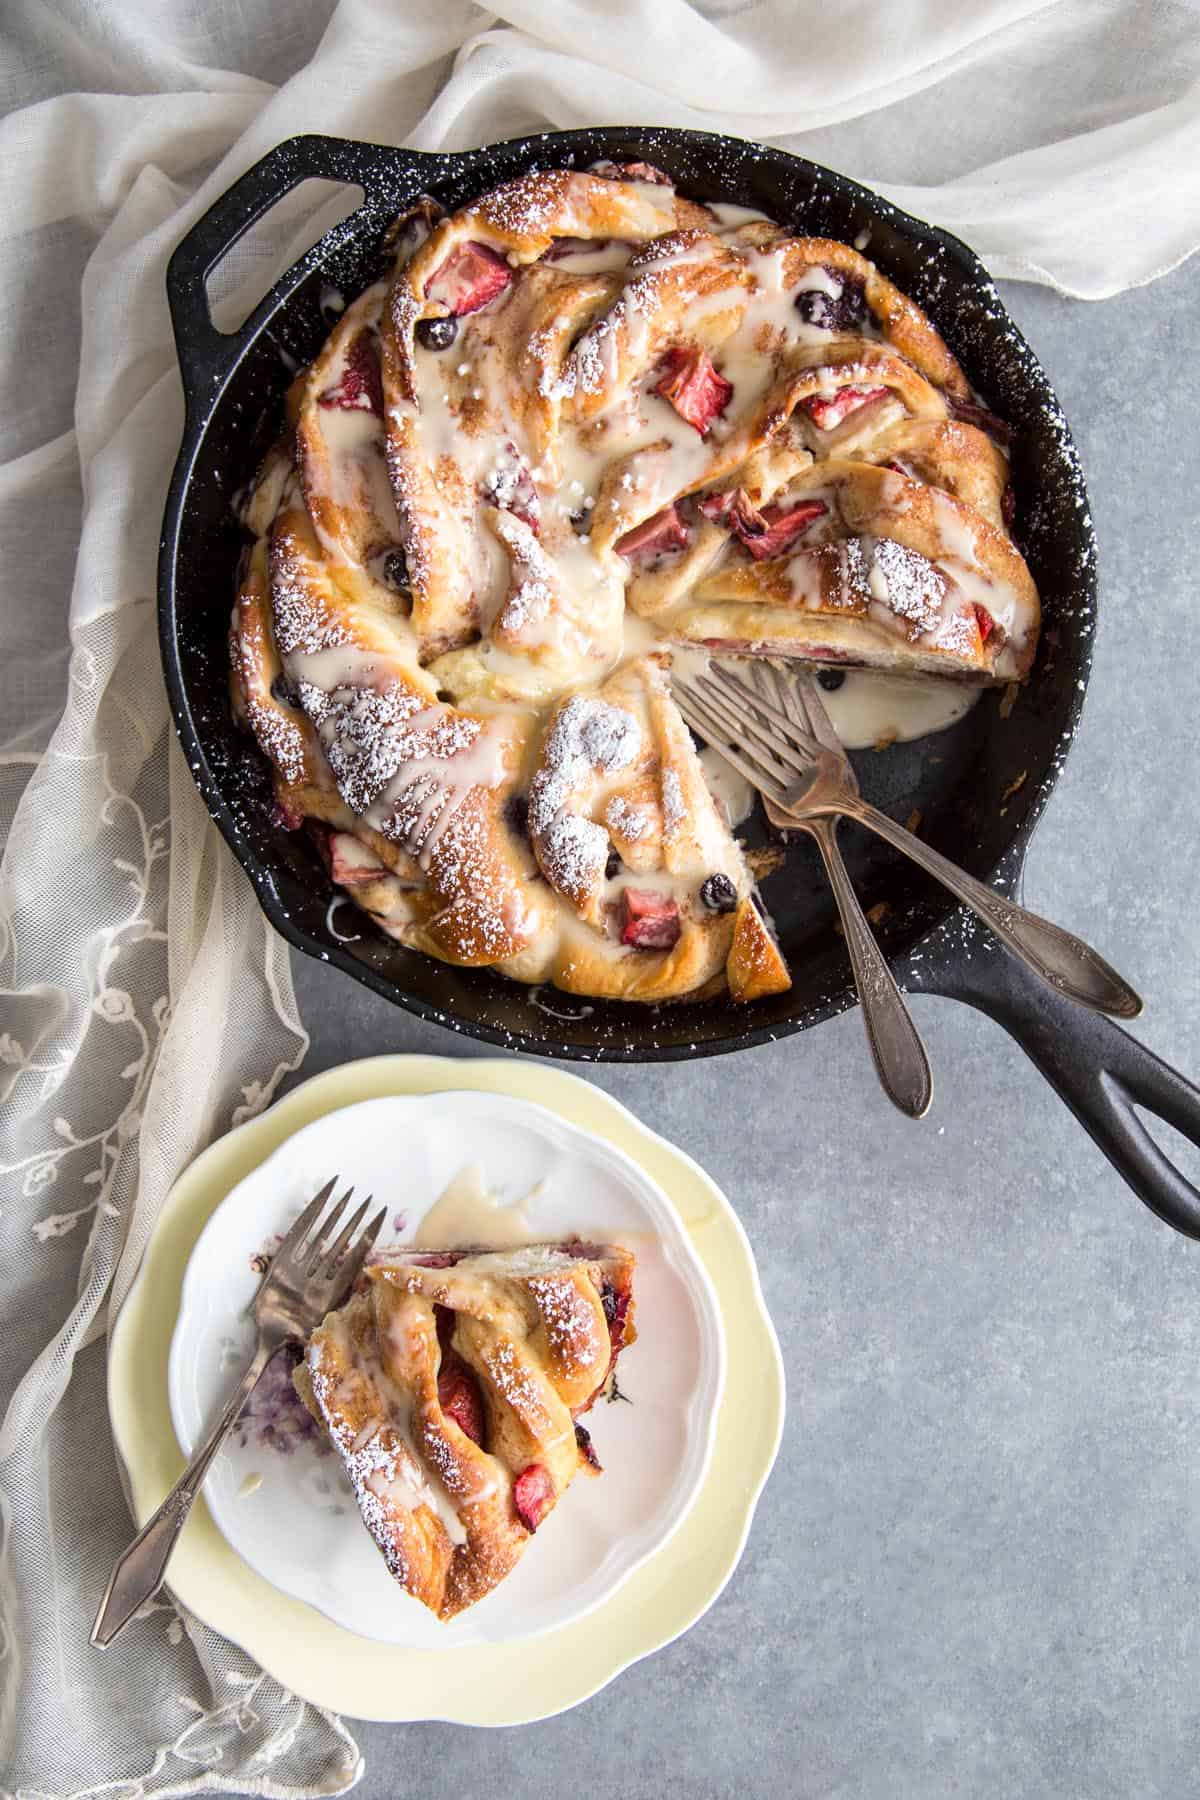 Cinnamon swirl bread in a cast iron skillet next to a slice of bread on a plate.